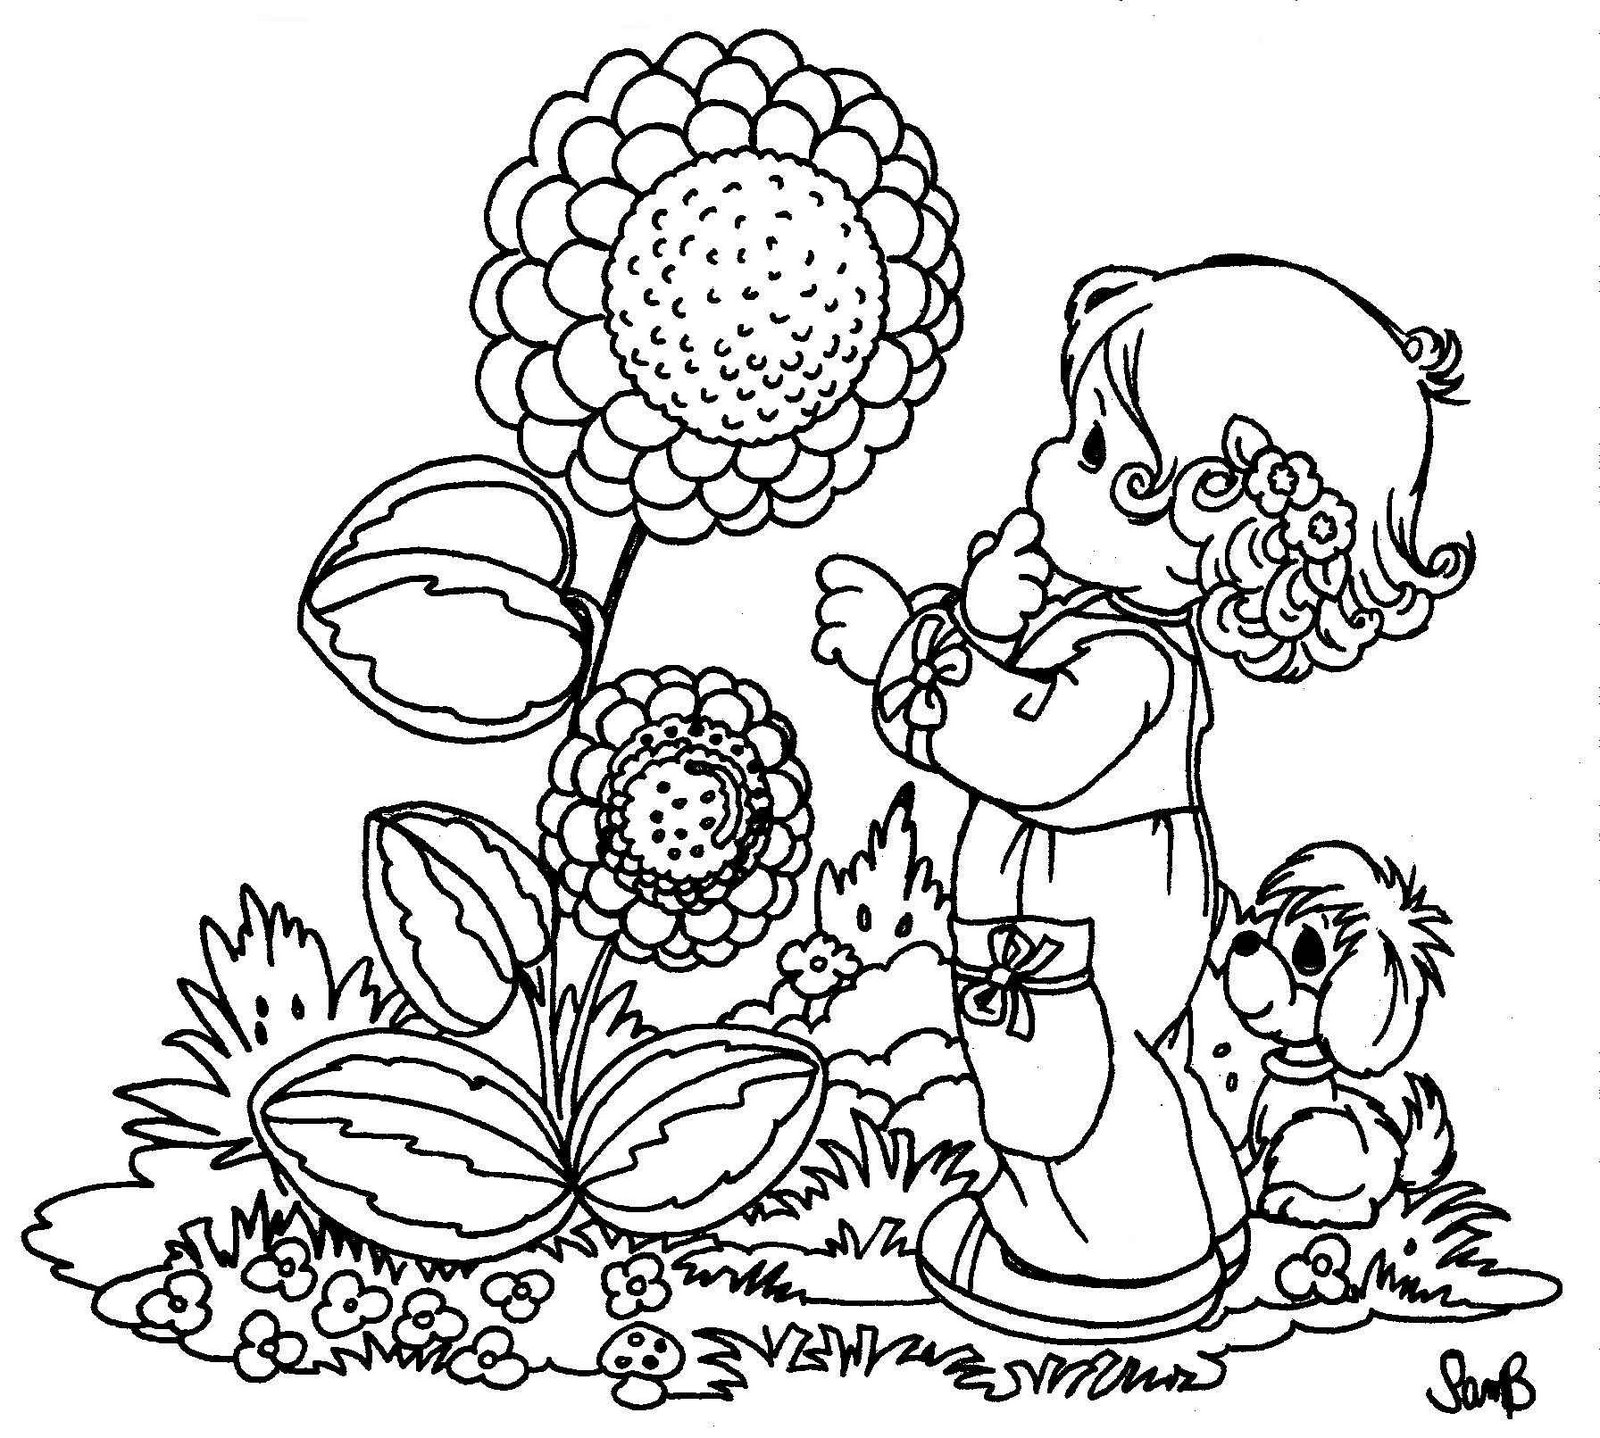  Spring Pictures Coloring pages | Spring Colouring pages | #16